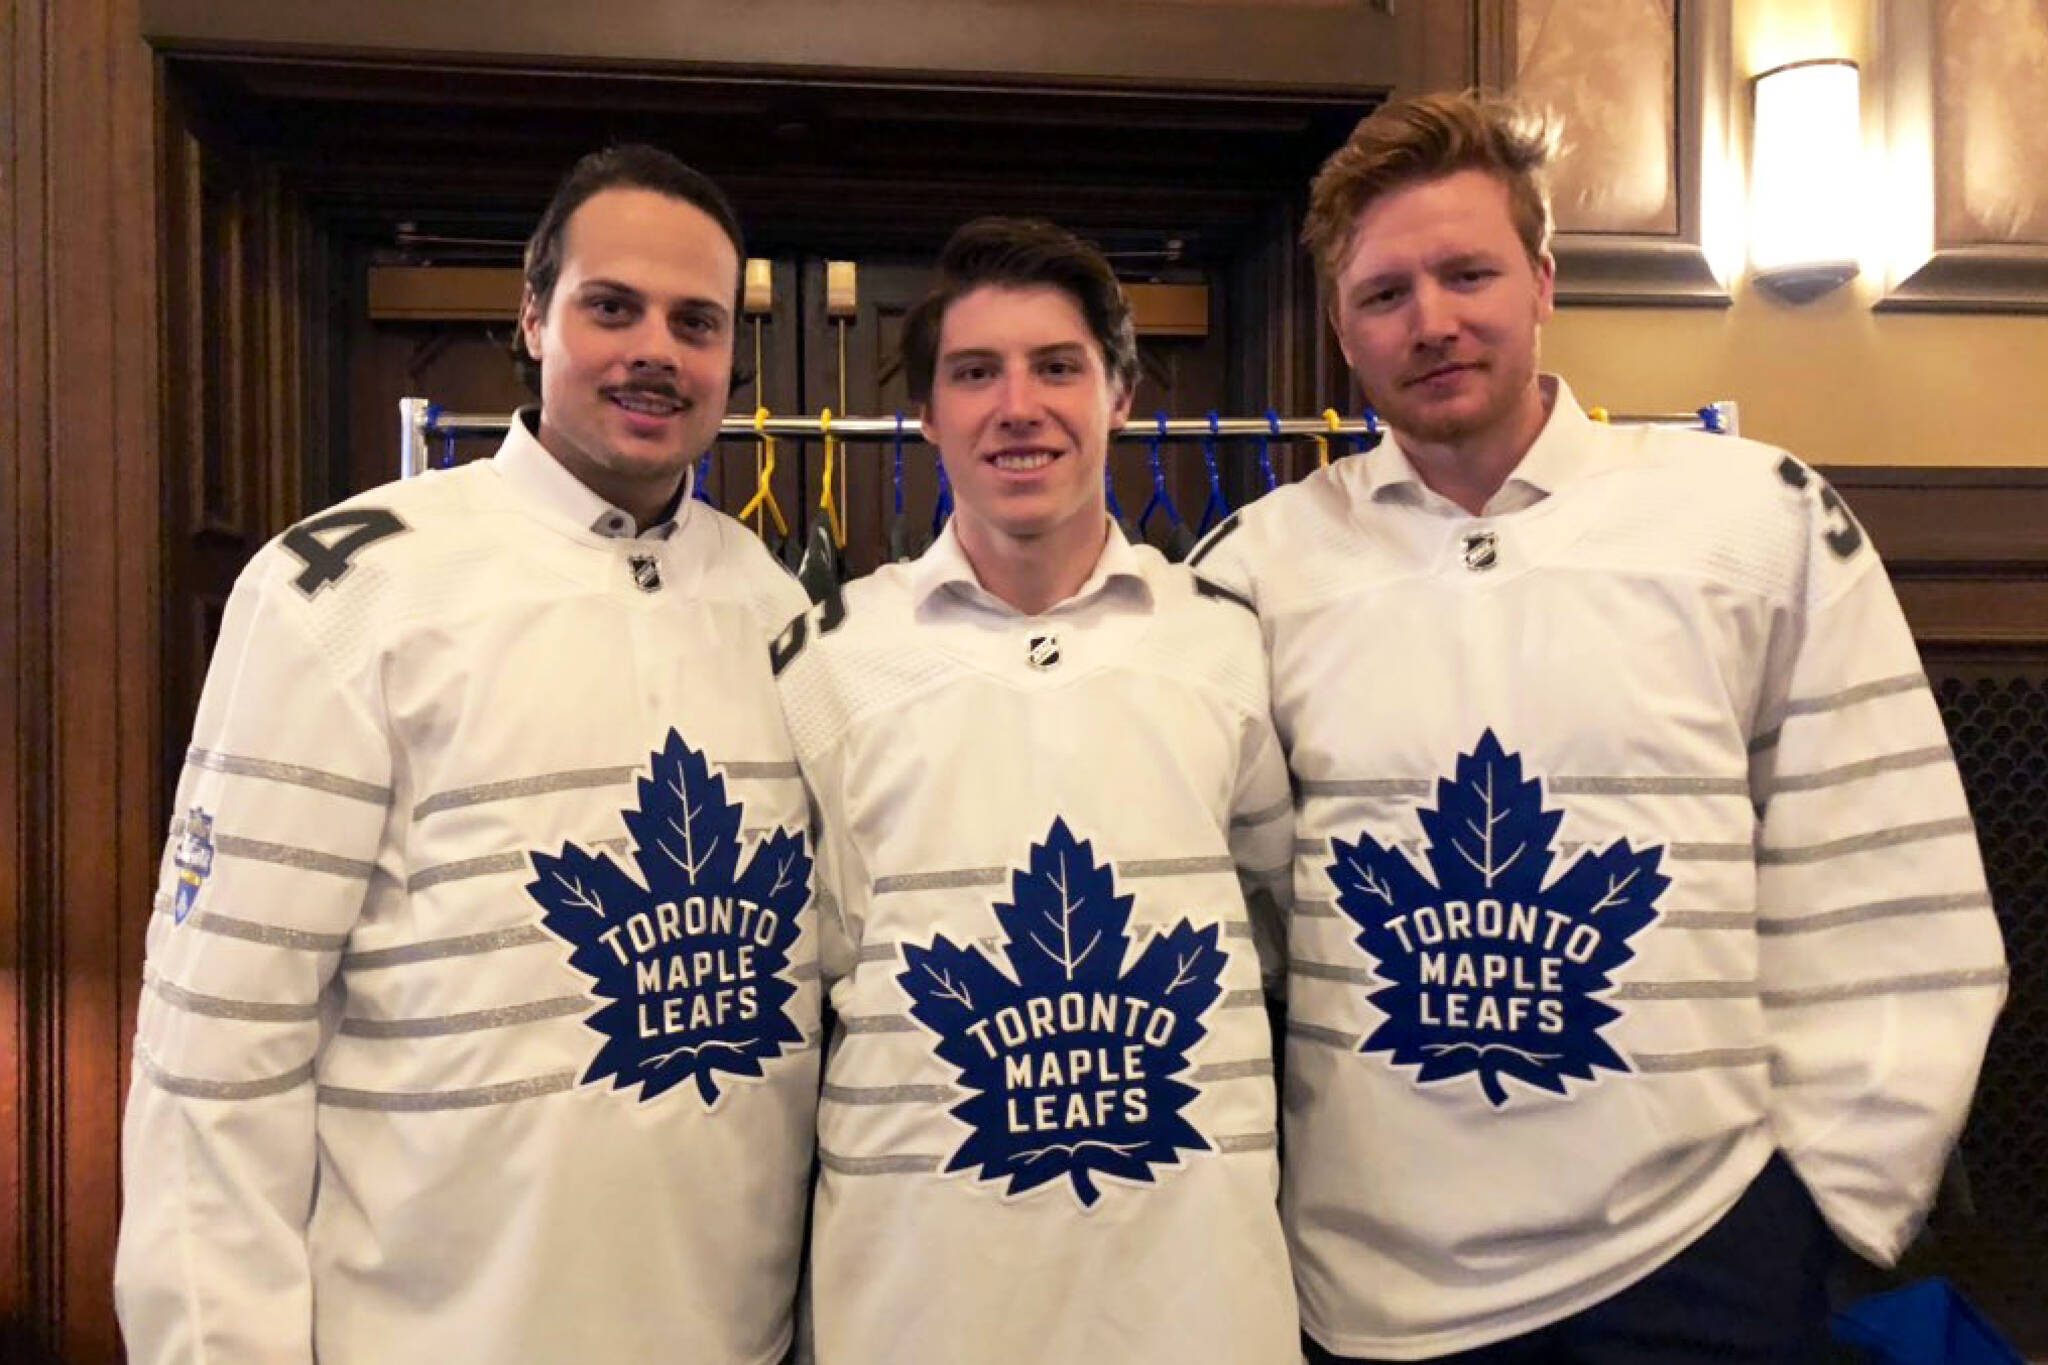 Another Member of the Toronto Maple Leafs has Made the All-Star Game